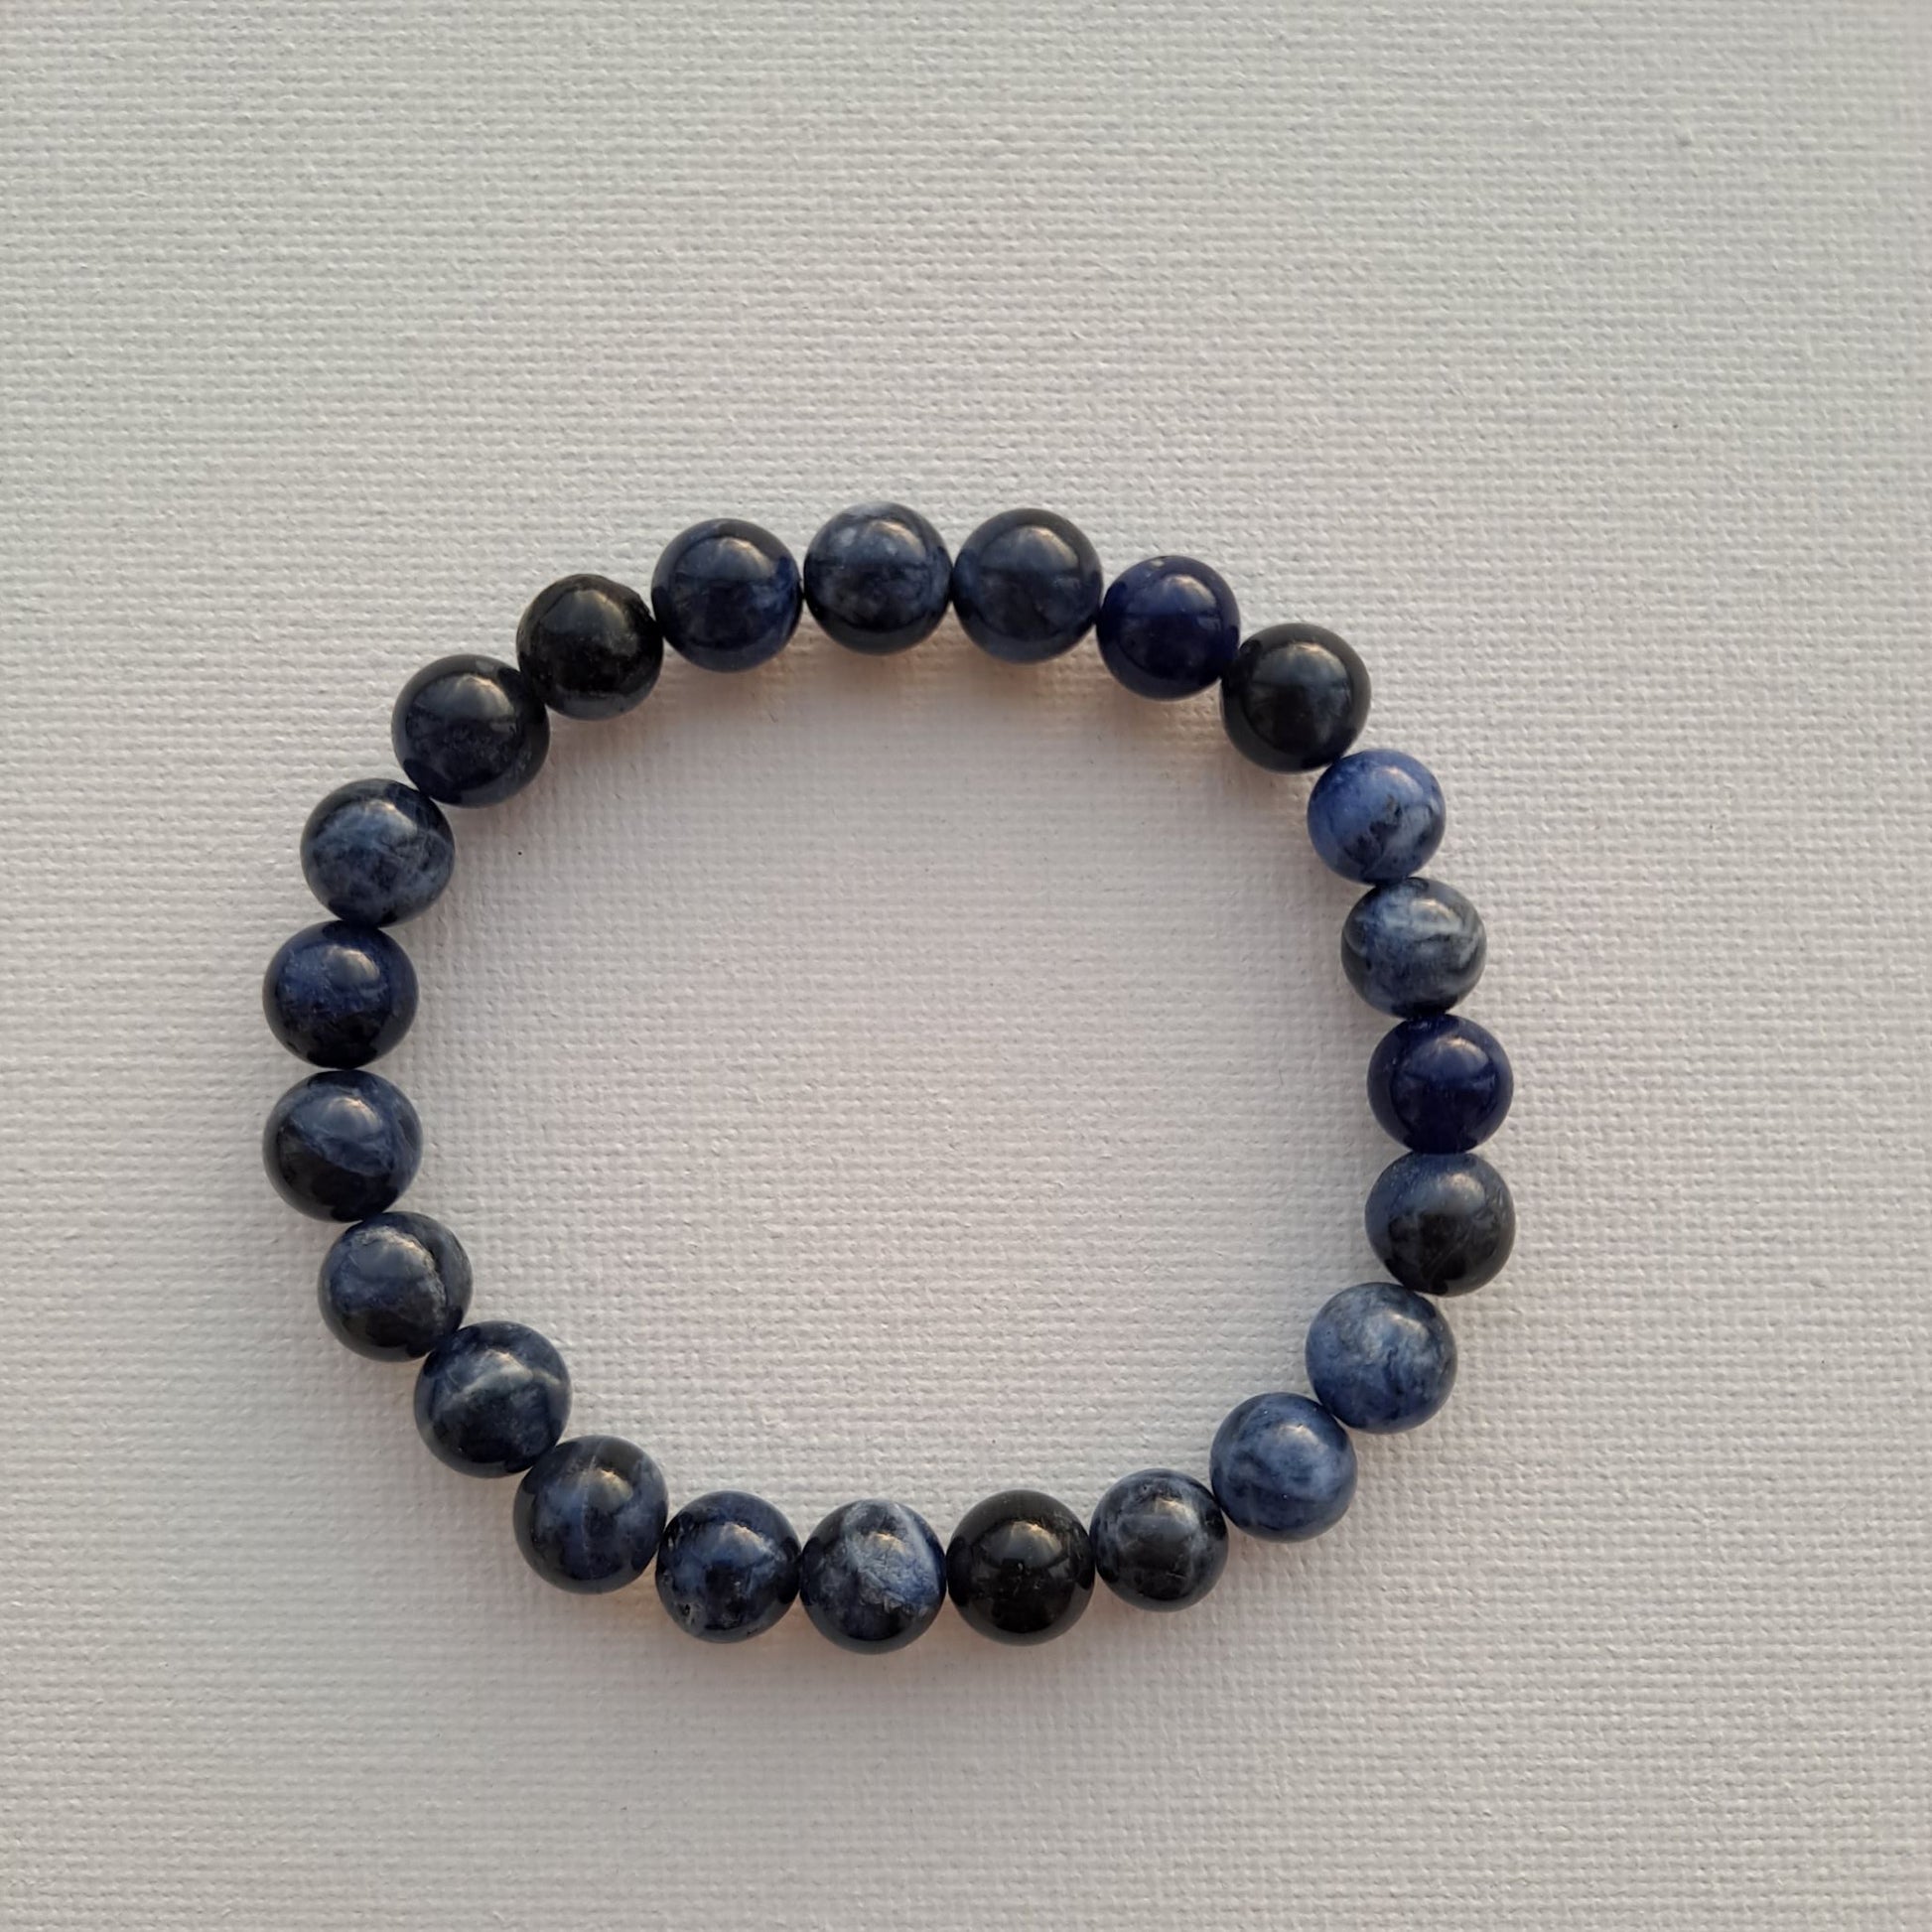 Dumi's Crystals | Sodalite Stretch Bracelet (7 Inch) | Close-up of a handcrafted bracelet featuring genuine 8mm beads in deep blue hues. Sodalite is known as the stone of truth and communication and is believed to promote clear communication, inner wisdom, mental clarity, and emotional balance.